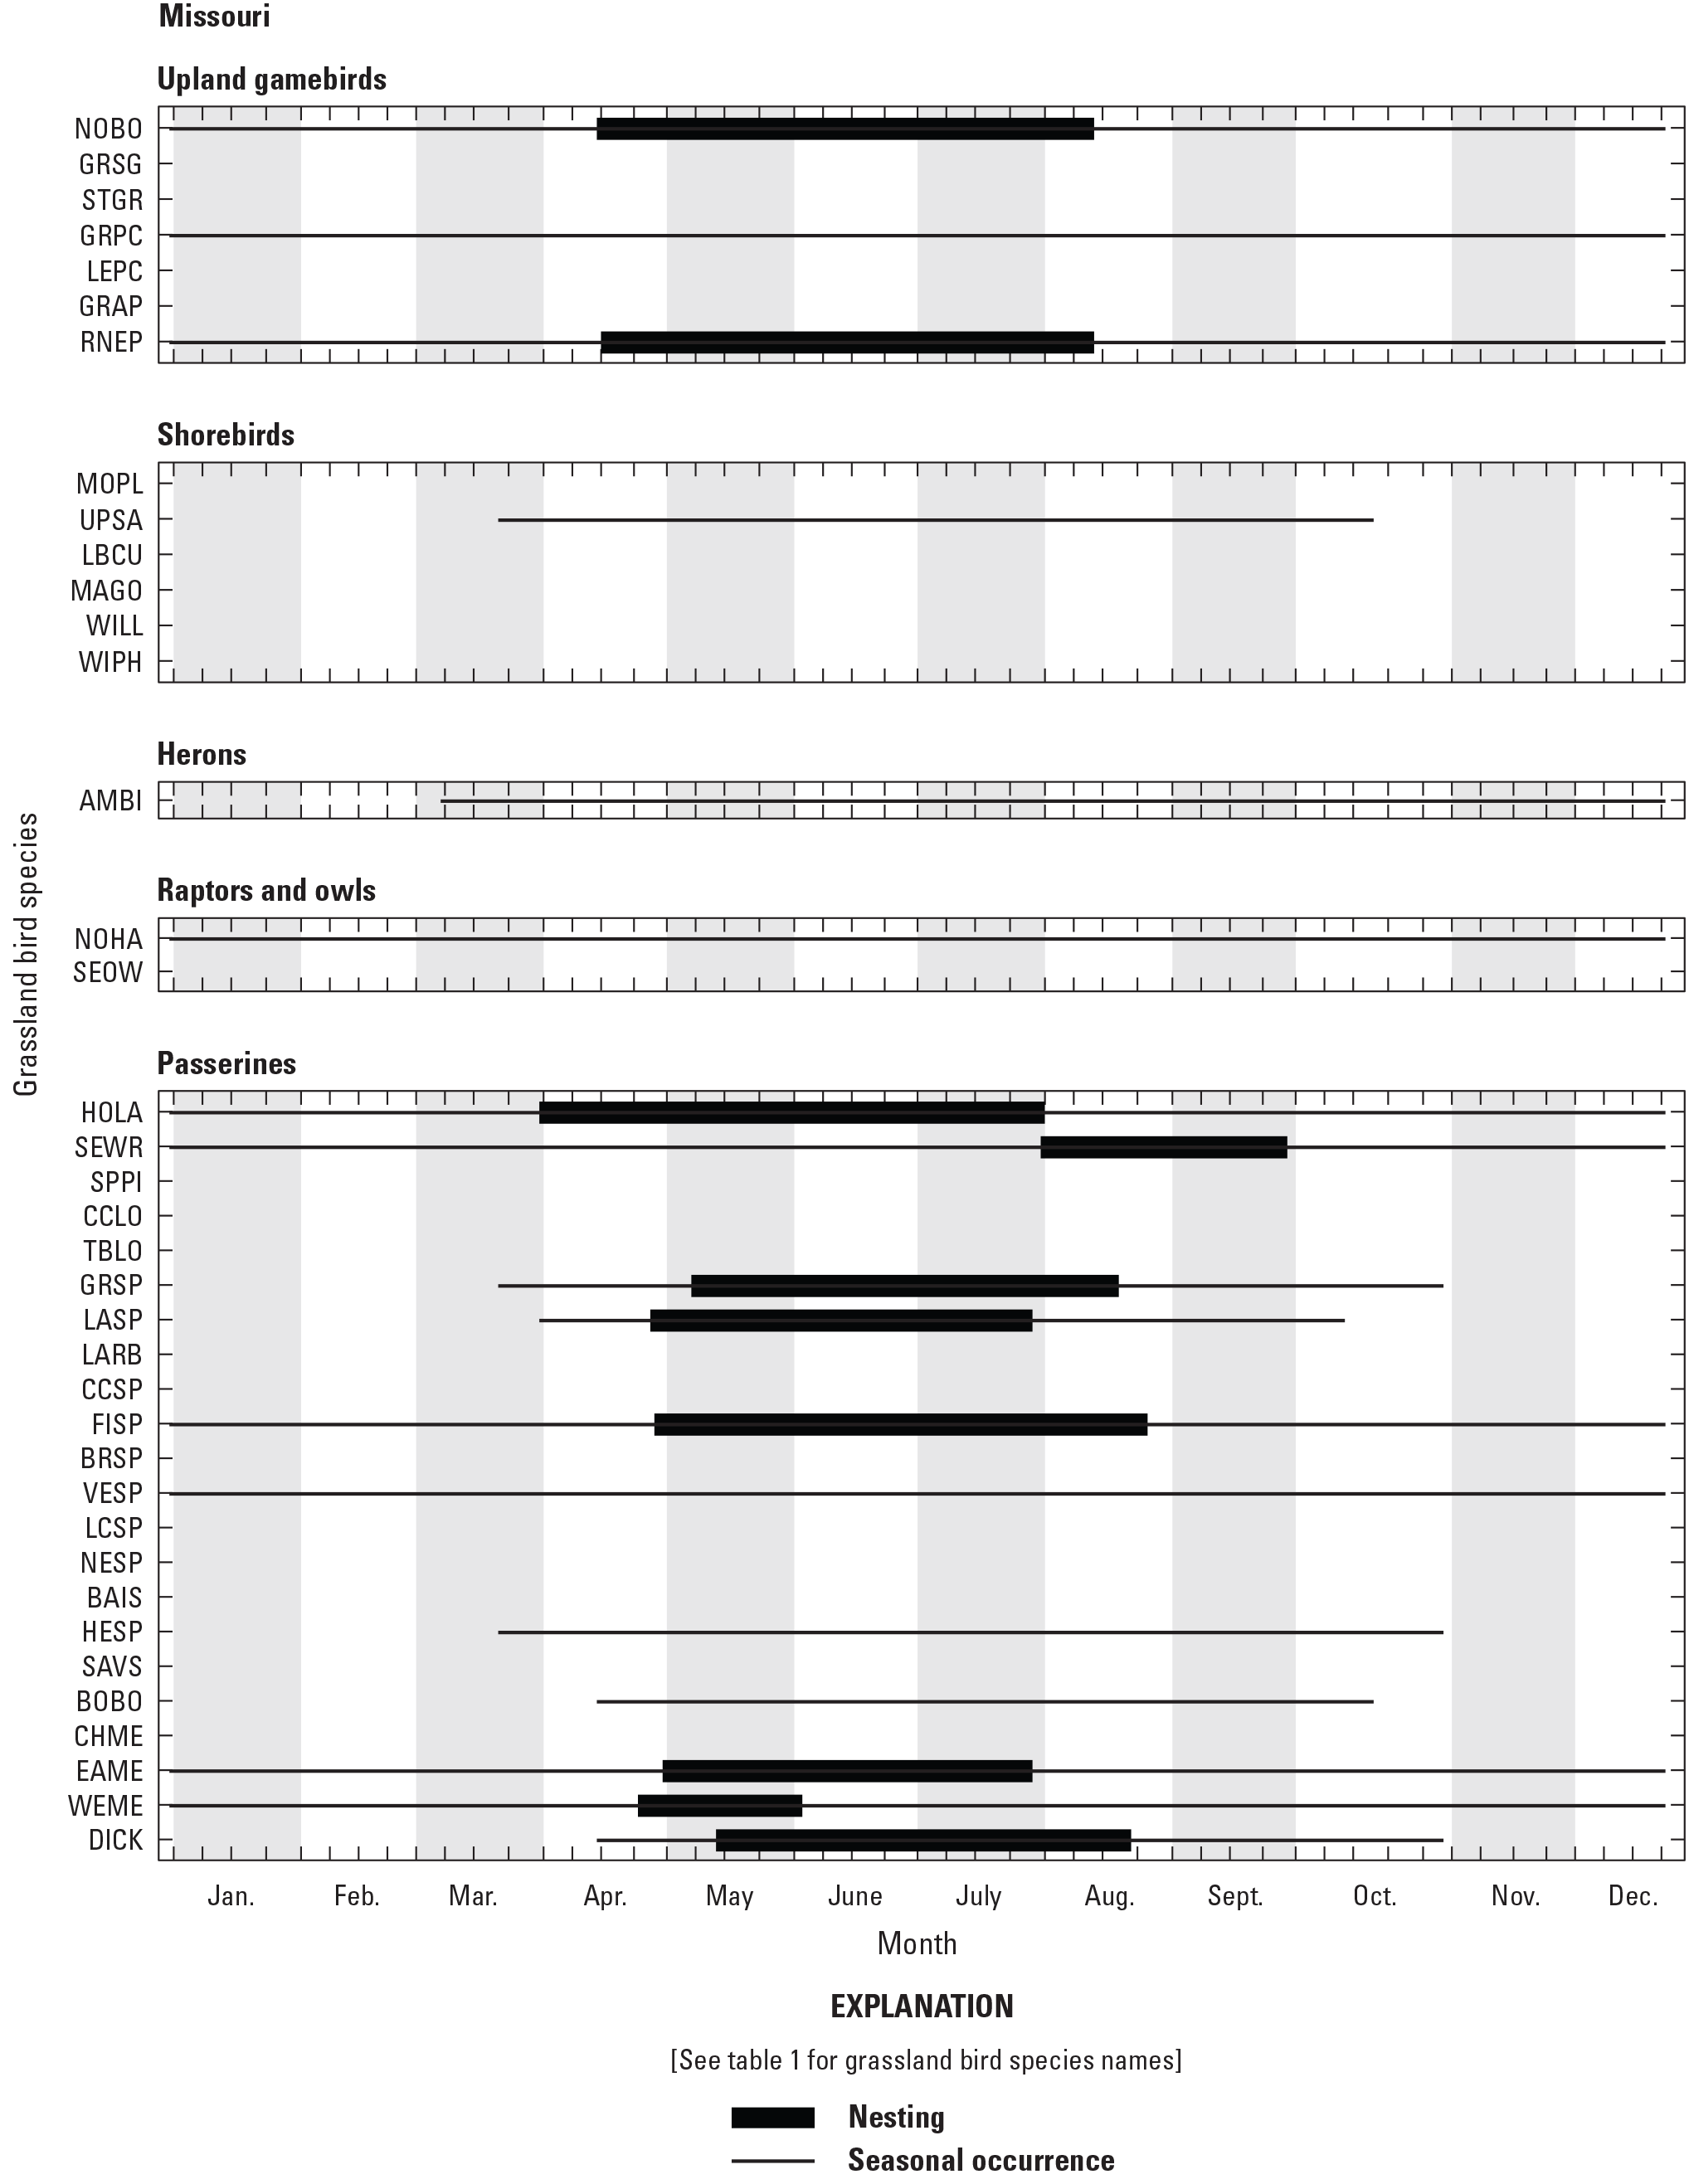 Figure showing seasonal occurrence and nesting phenology for 38 grassland bird species
               in Missouri, United States.